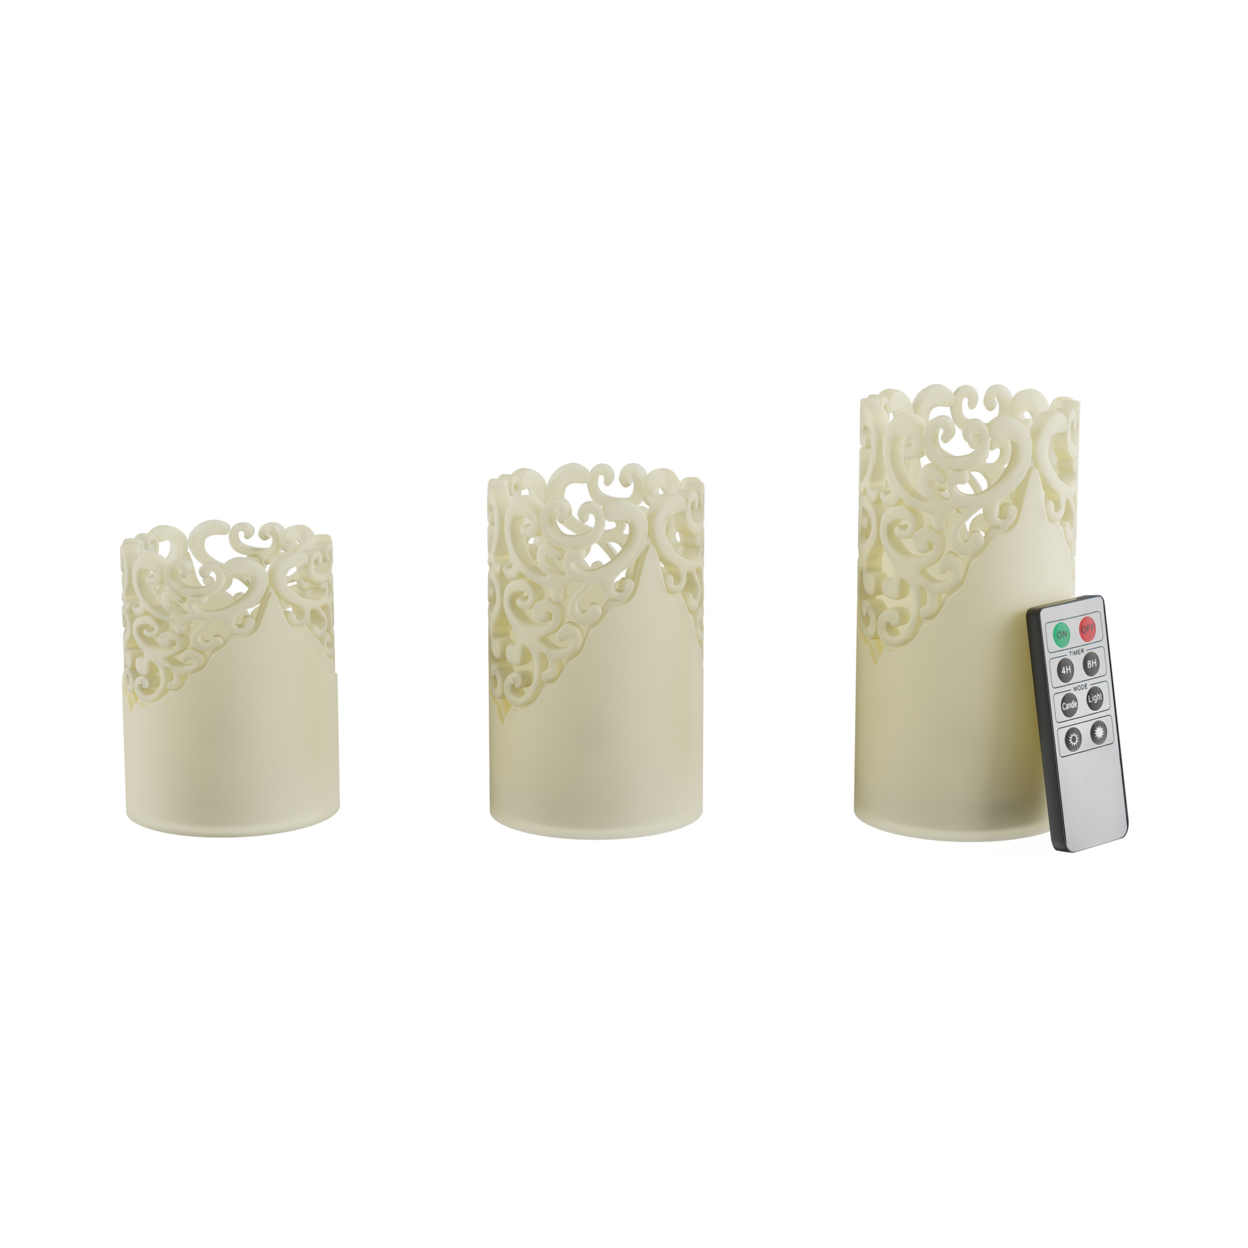 LED Candles With Remote Control-Set Of 3 Lace Detailed, Vanilla Scented Wax, Realistic Flameless Pillar Lights